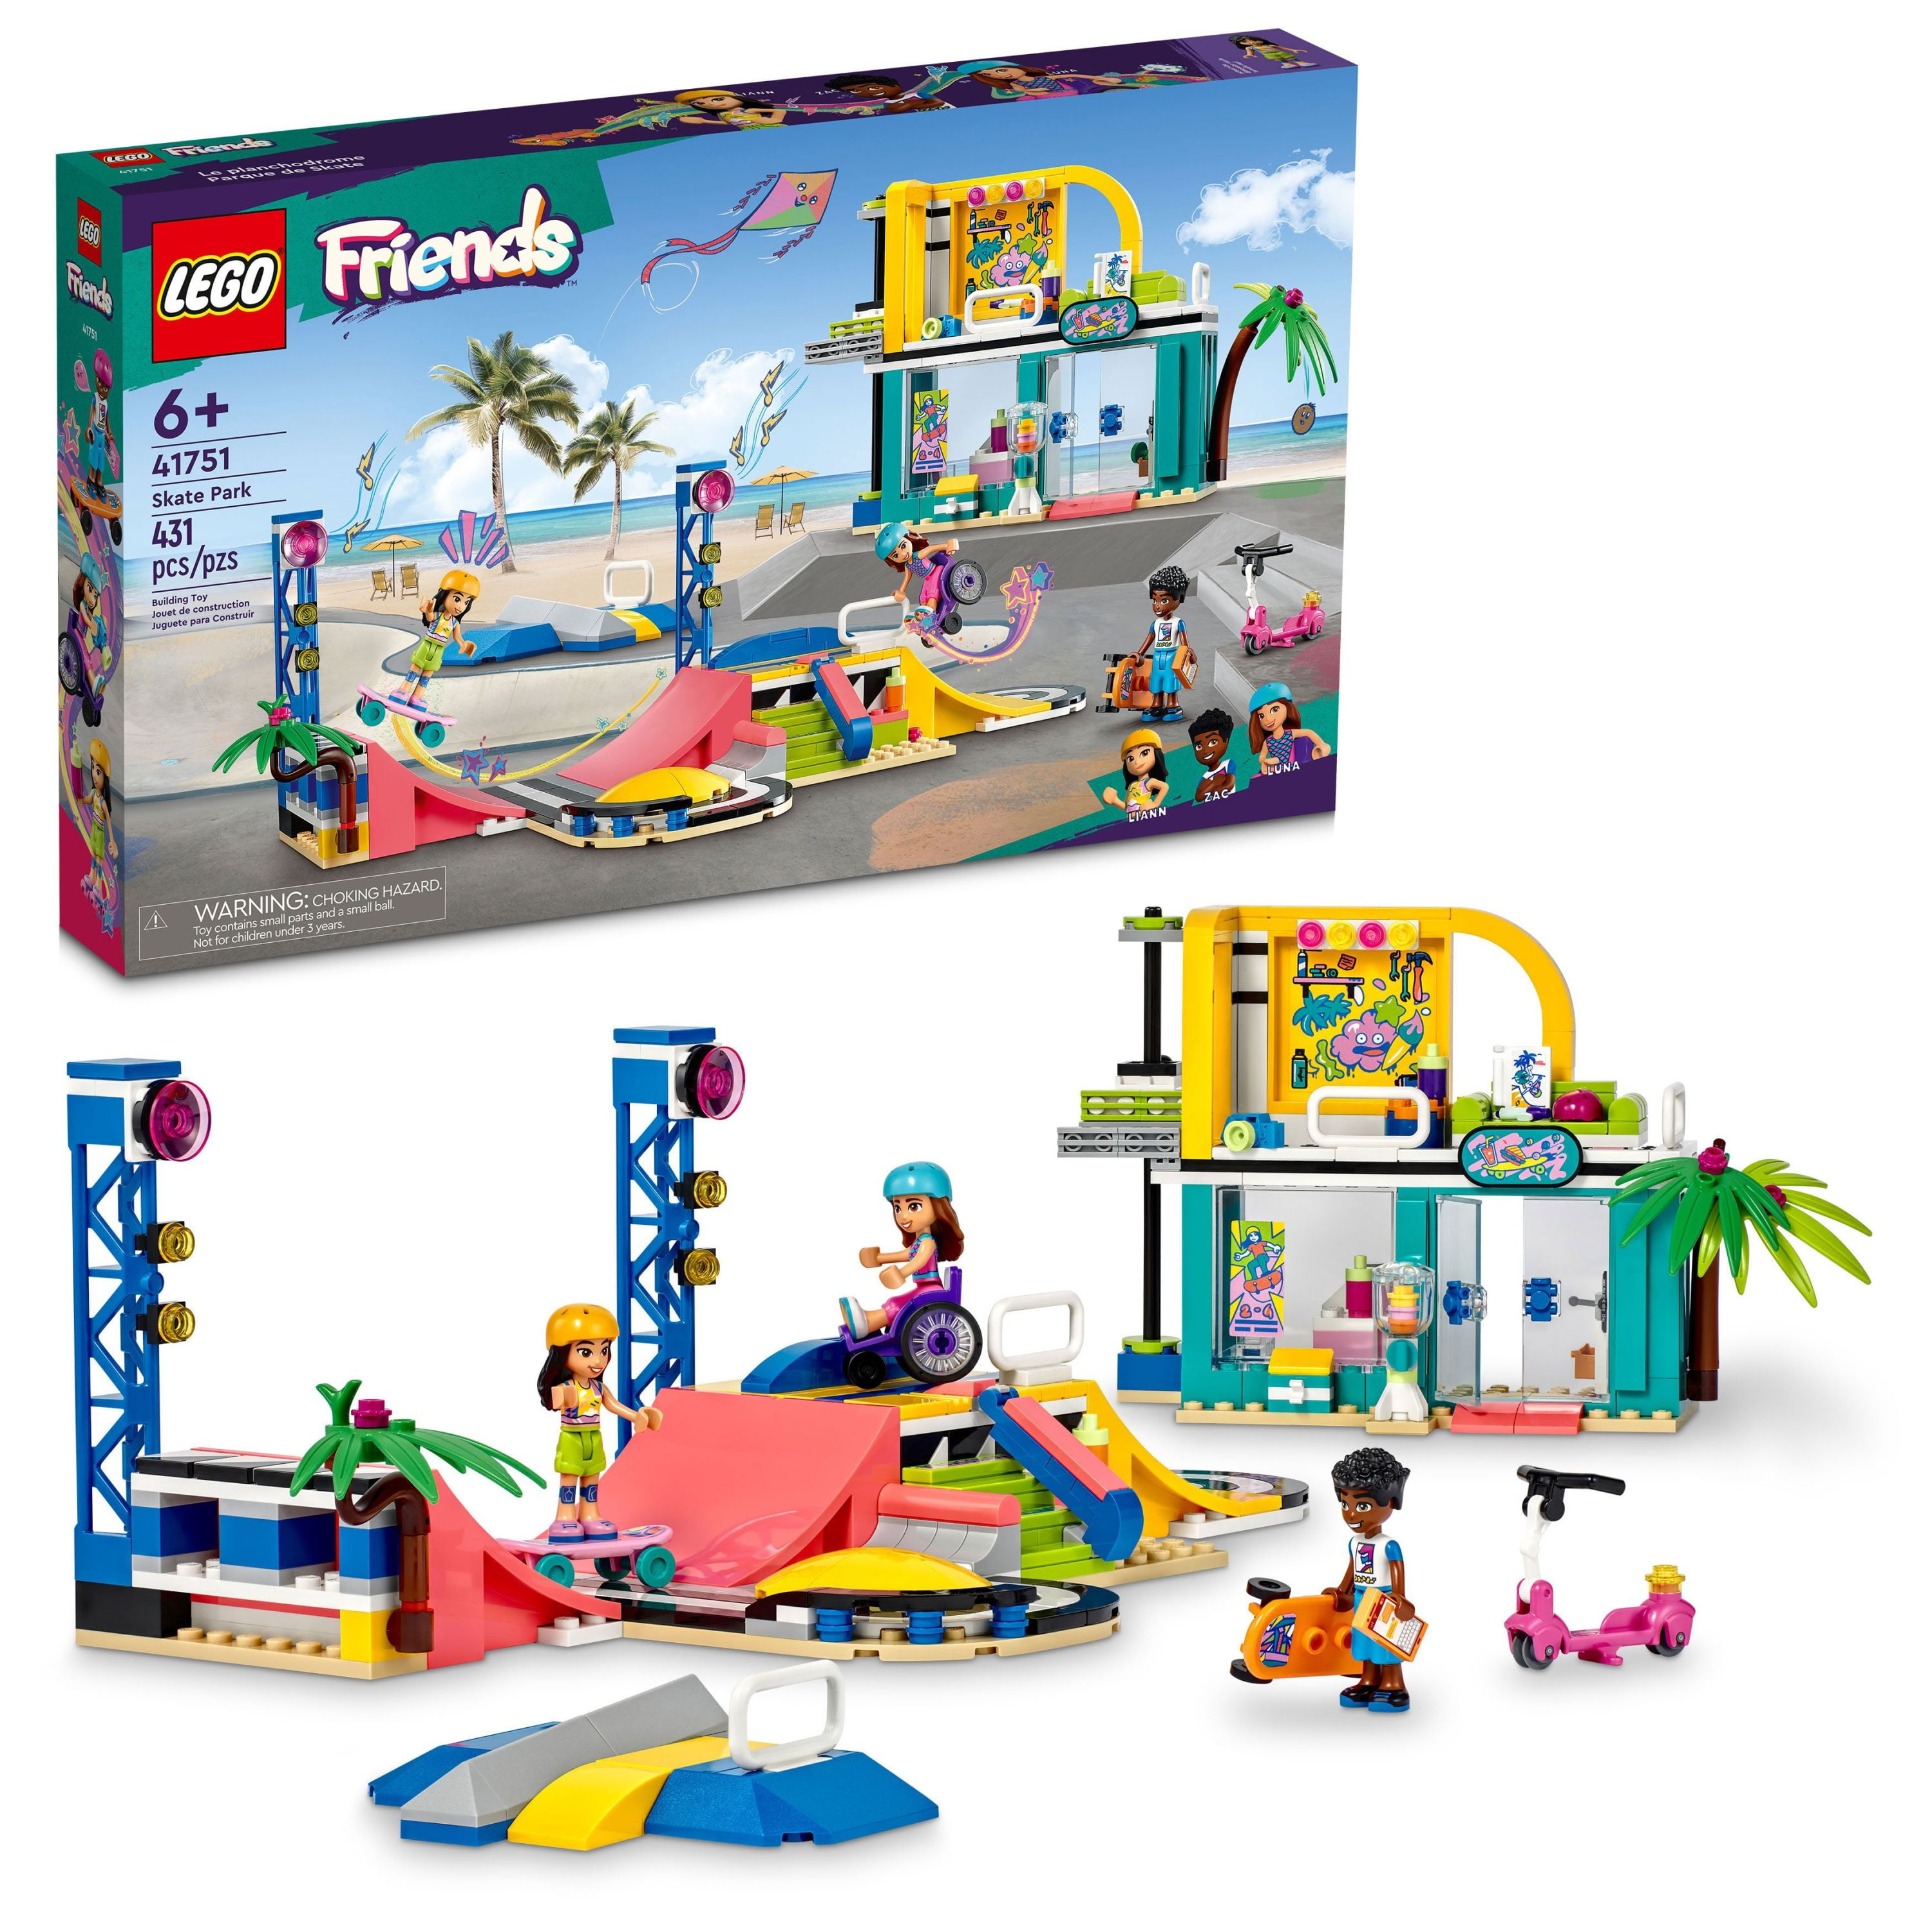 aldrig korn Forladt LEGO Friends Skate Park Set 41751, Skateboard Toy and Mini-Doll Playset for  Creative Play, Perfect Gift Idea for Boys and Girls Age 6 Plus, Includes a  Toy Scooter and Wheelchair - Walmart.com